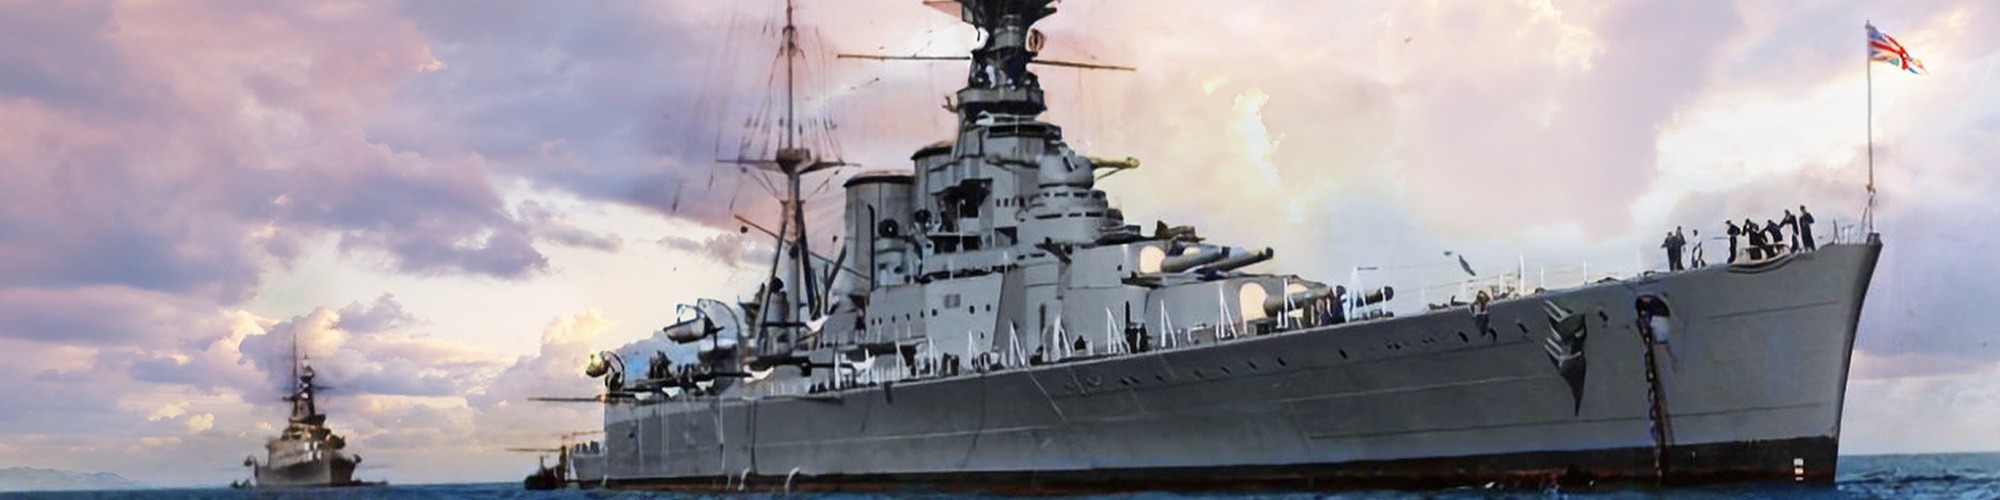 Was HMS Hood really sunk by the Bismarck?